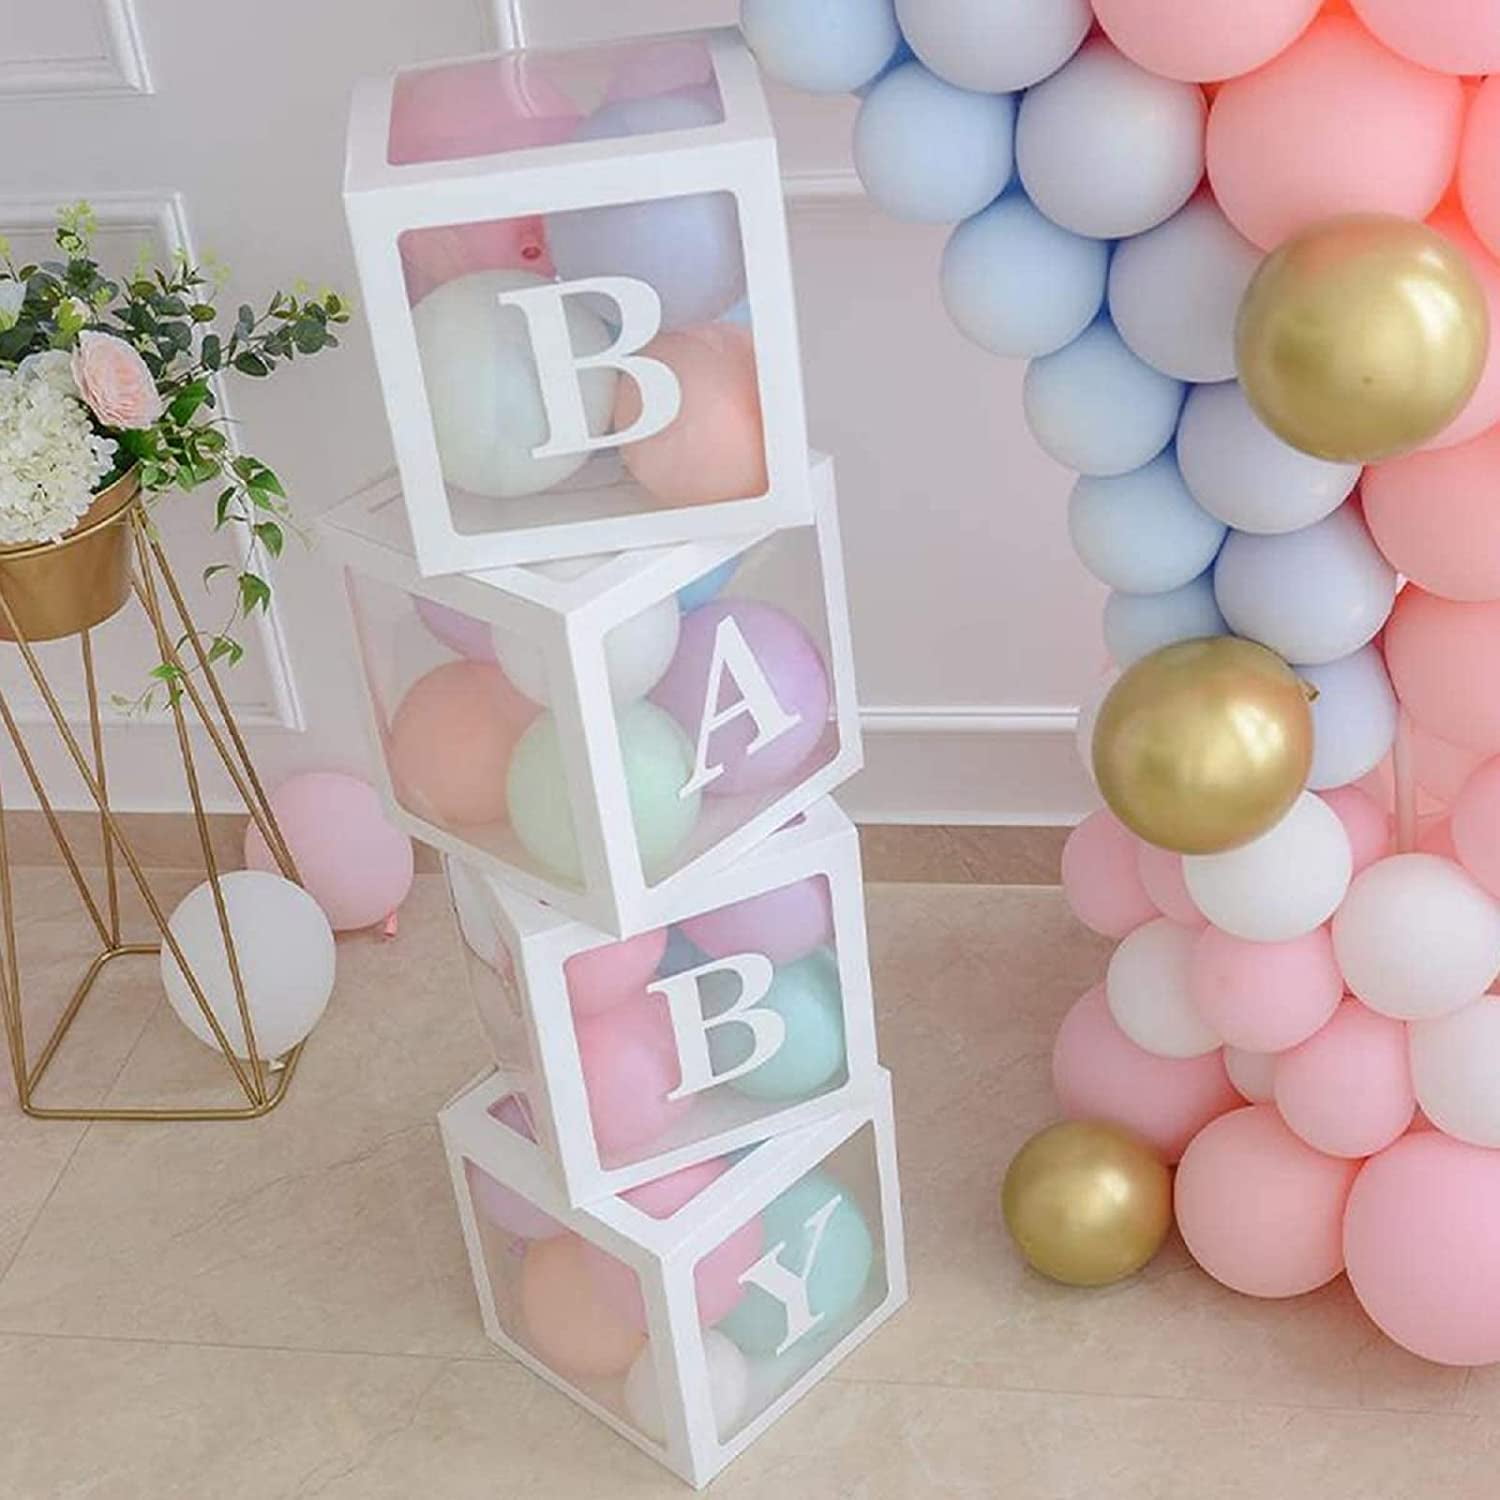 Wood Print Baby Shower Boxes for Teddy Bear Birthday Party Centerpiece - 4  Pcs Wood Grain Baby Cubes Rustic Baby Blocks with Letters, Brown Baby